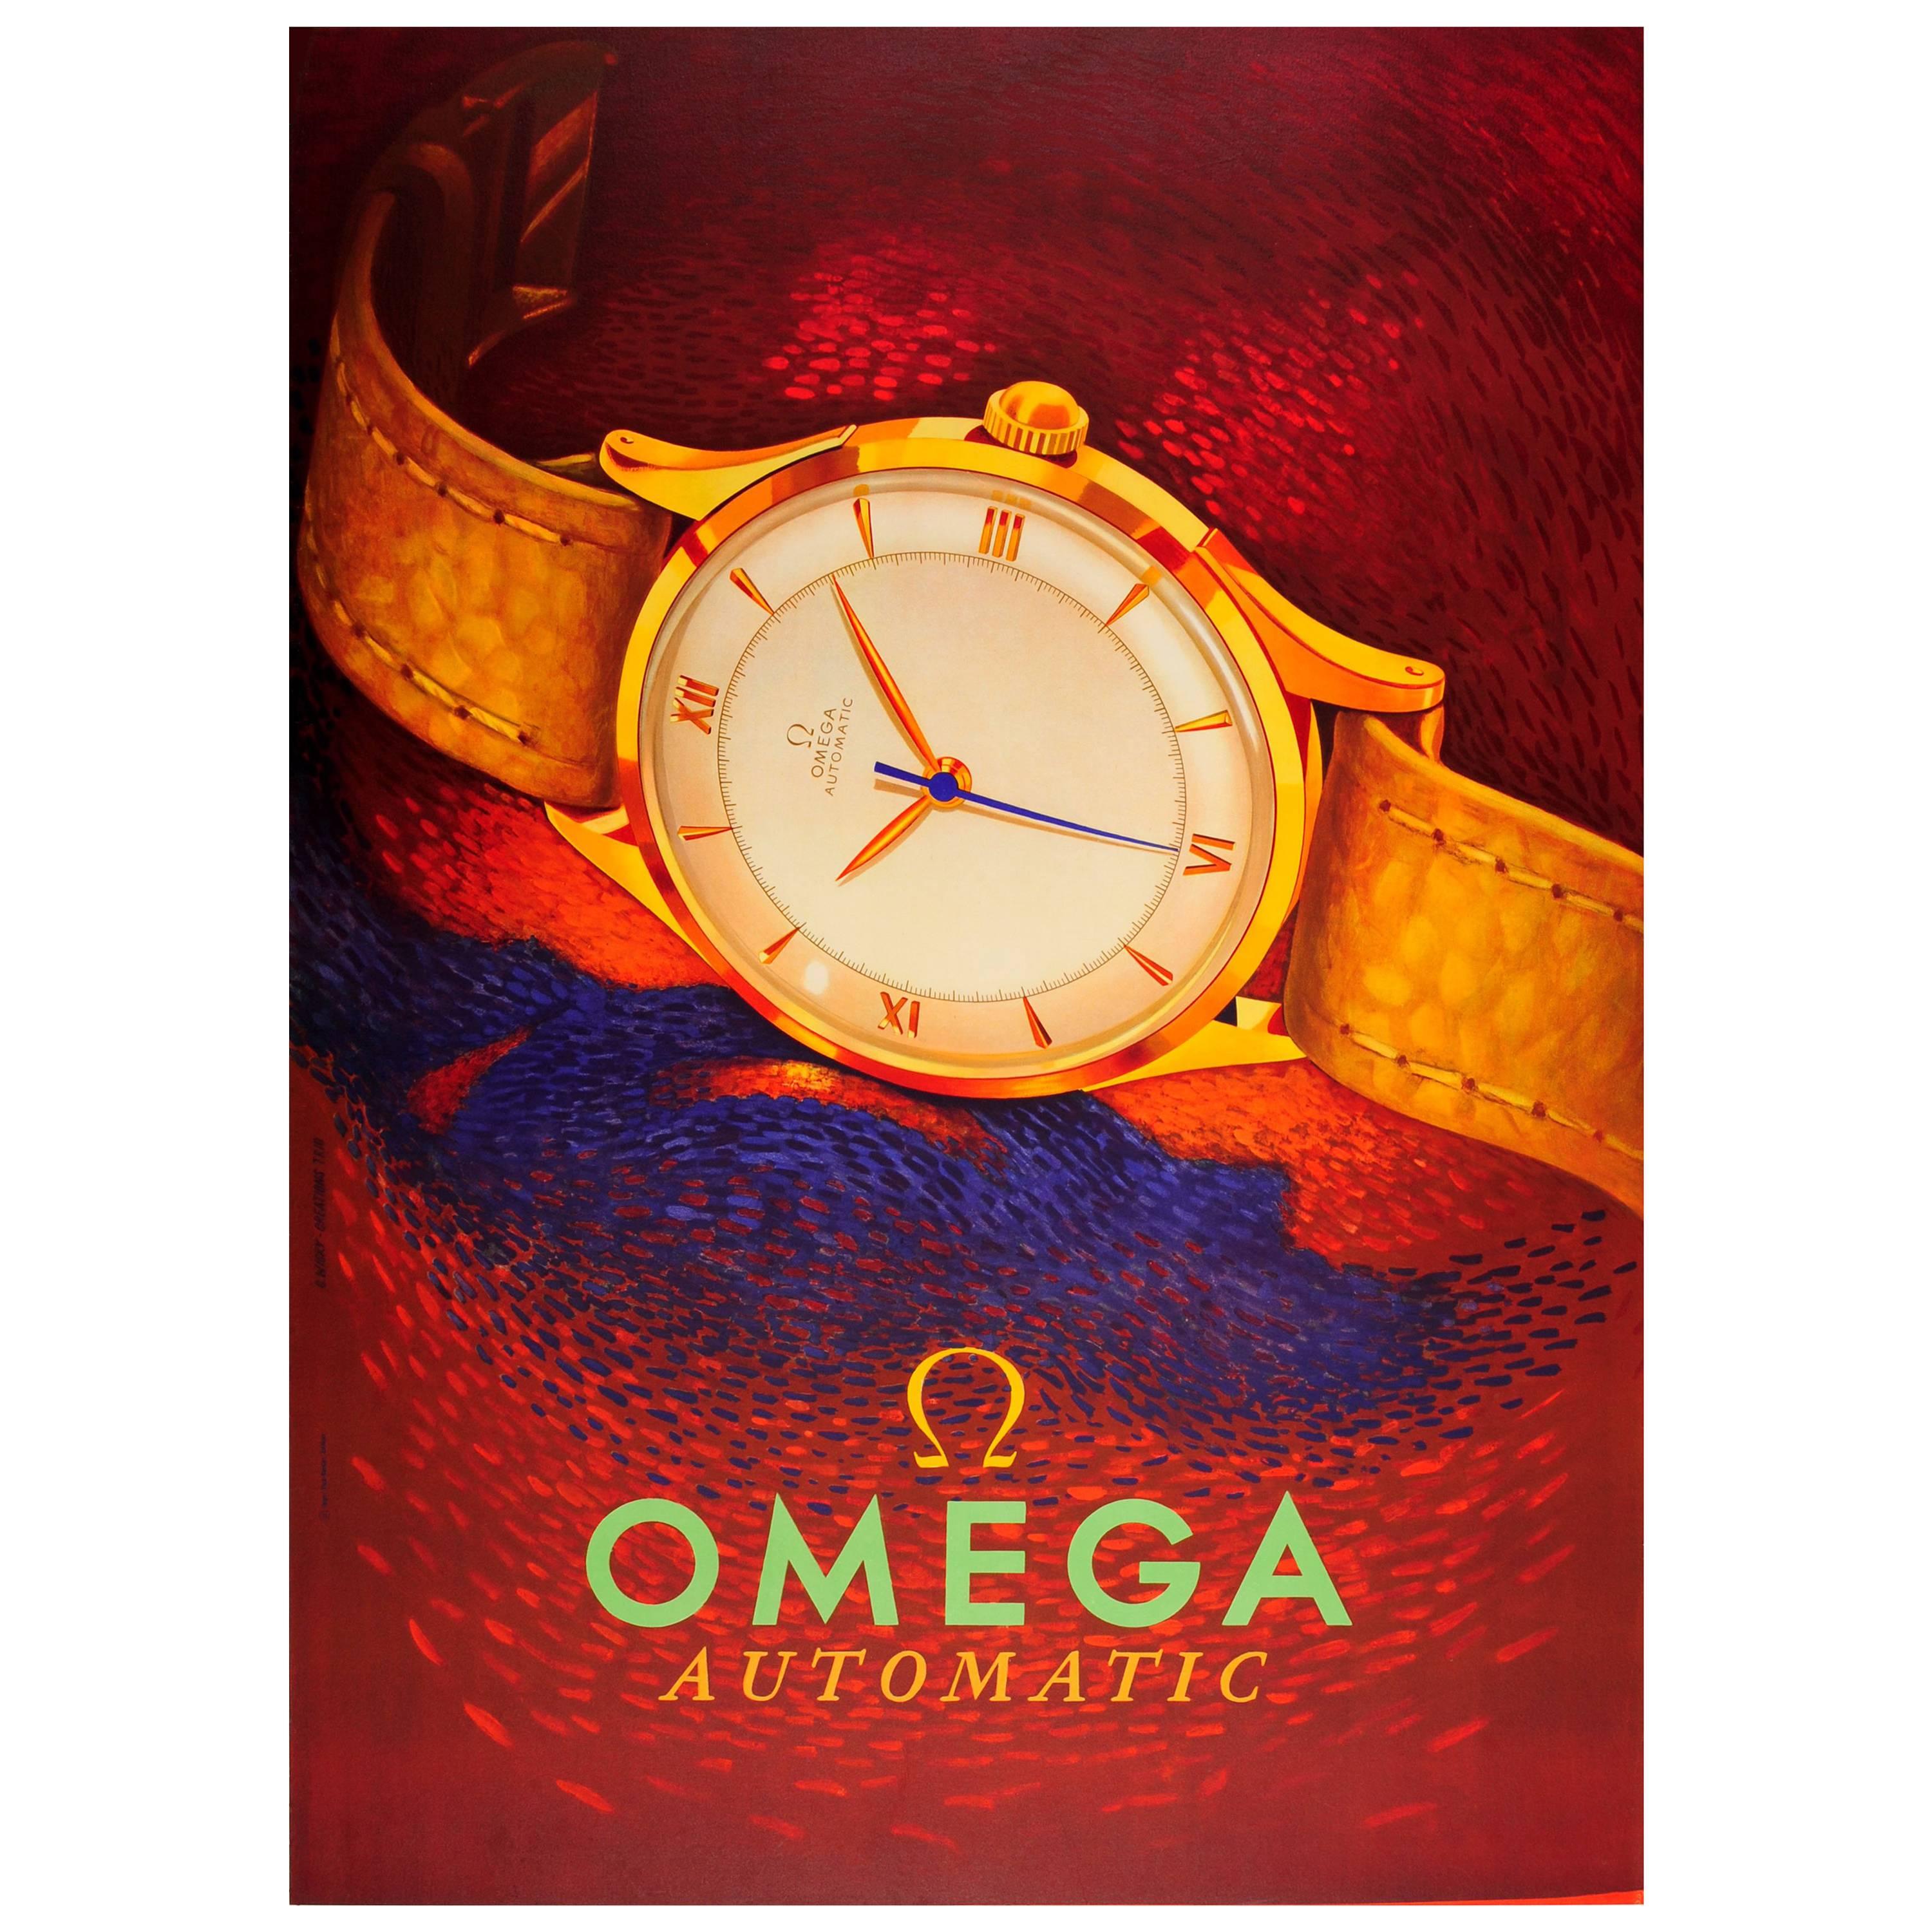 Original Vintage Swiss Watch Advertising Poster for Omega Automatic Watches